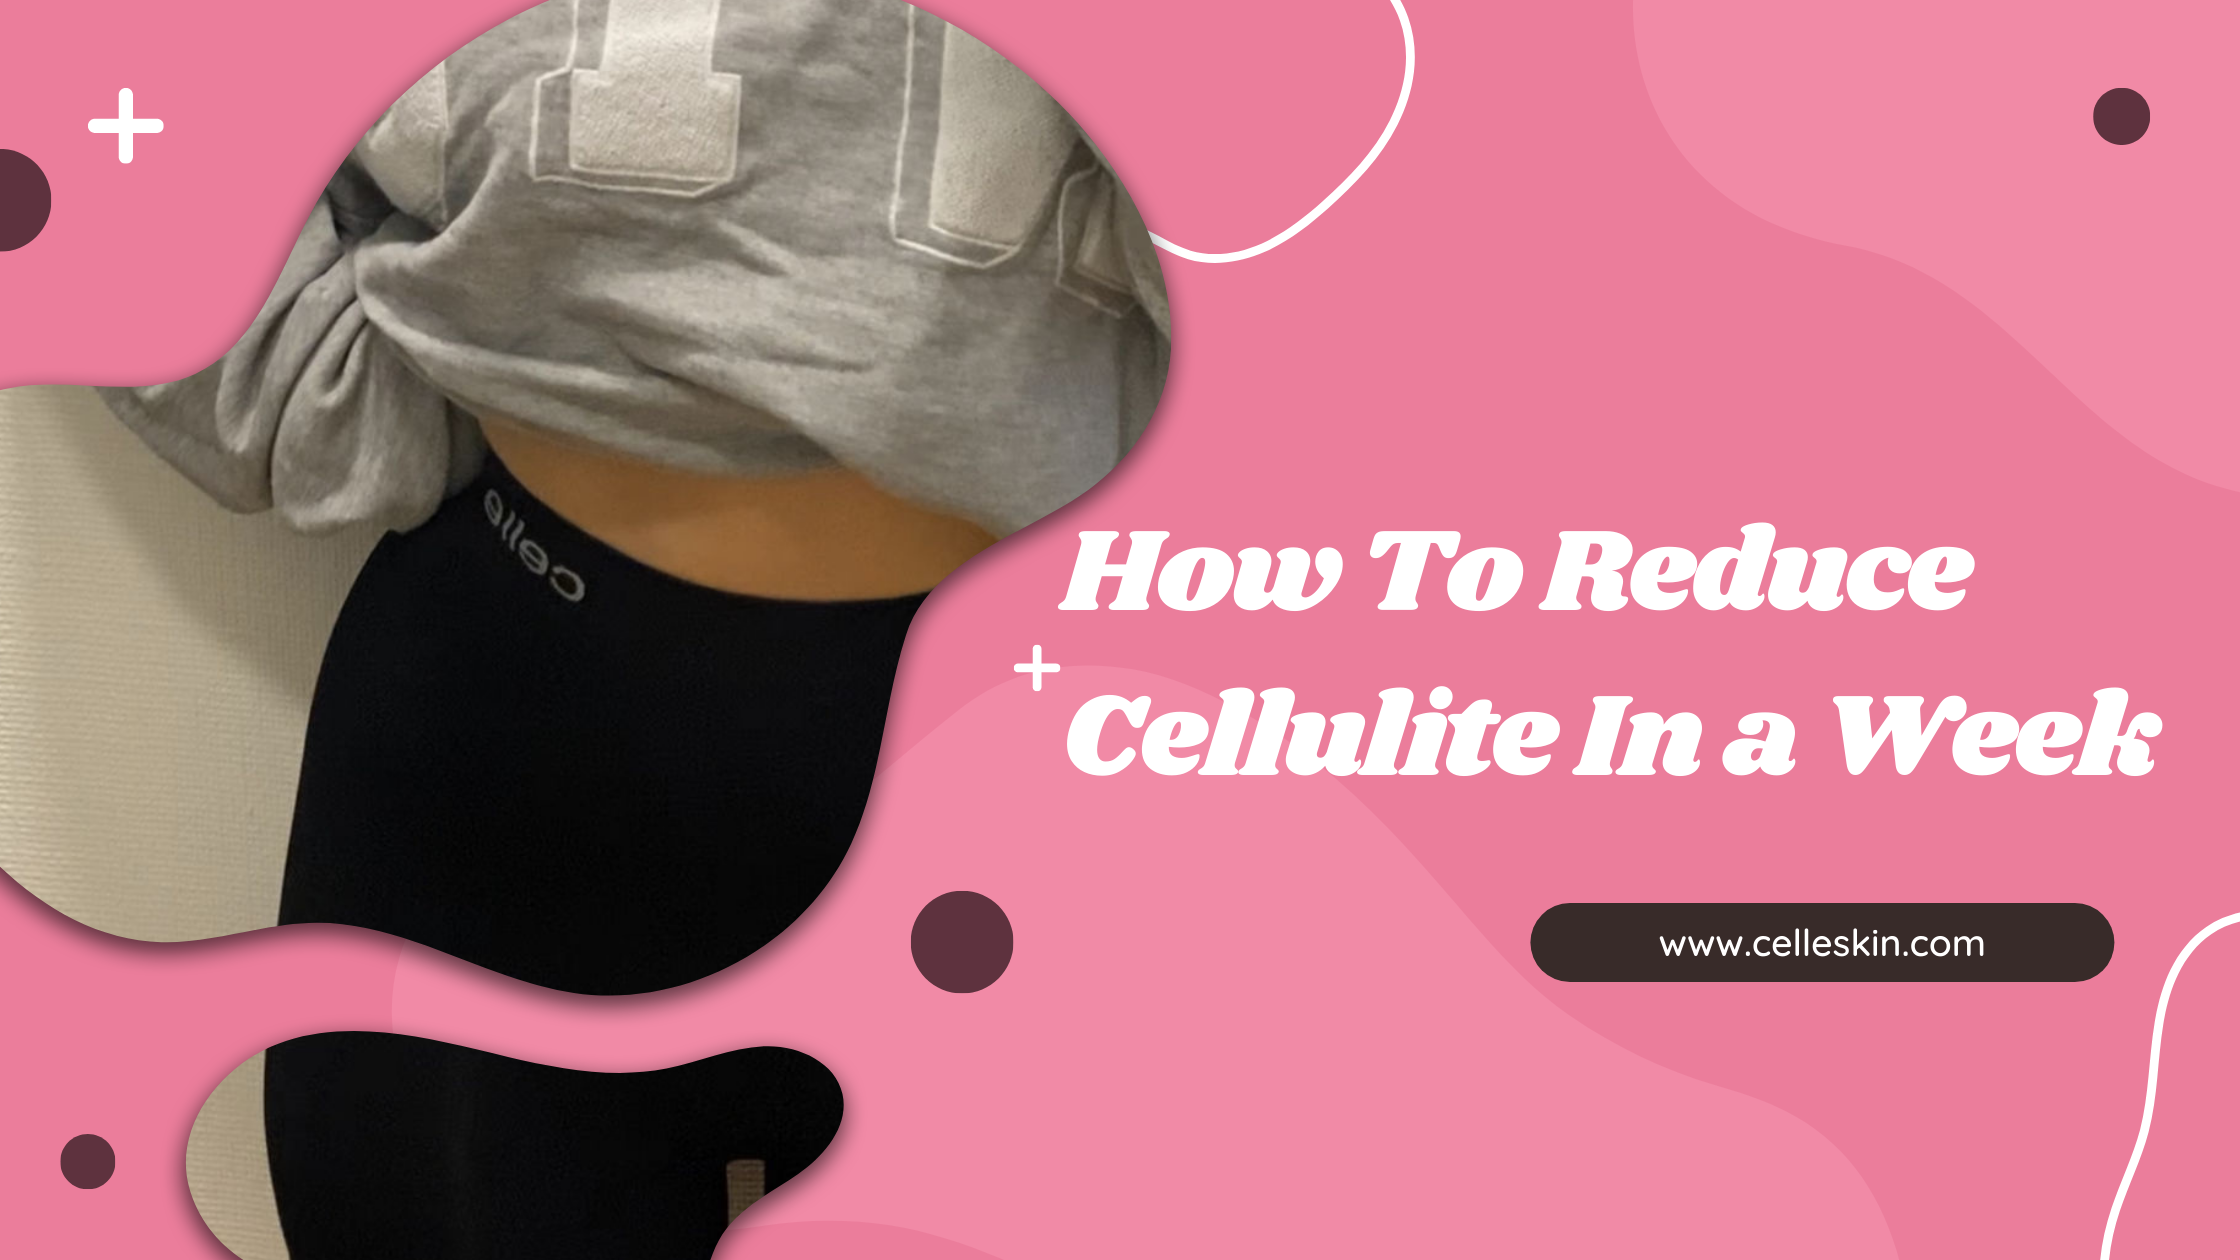 Cellulite reduction tips